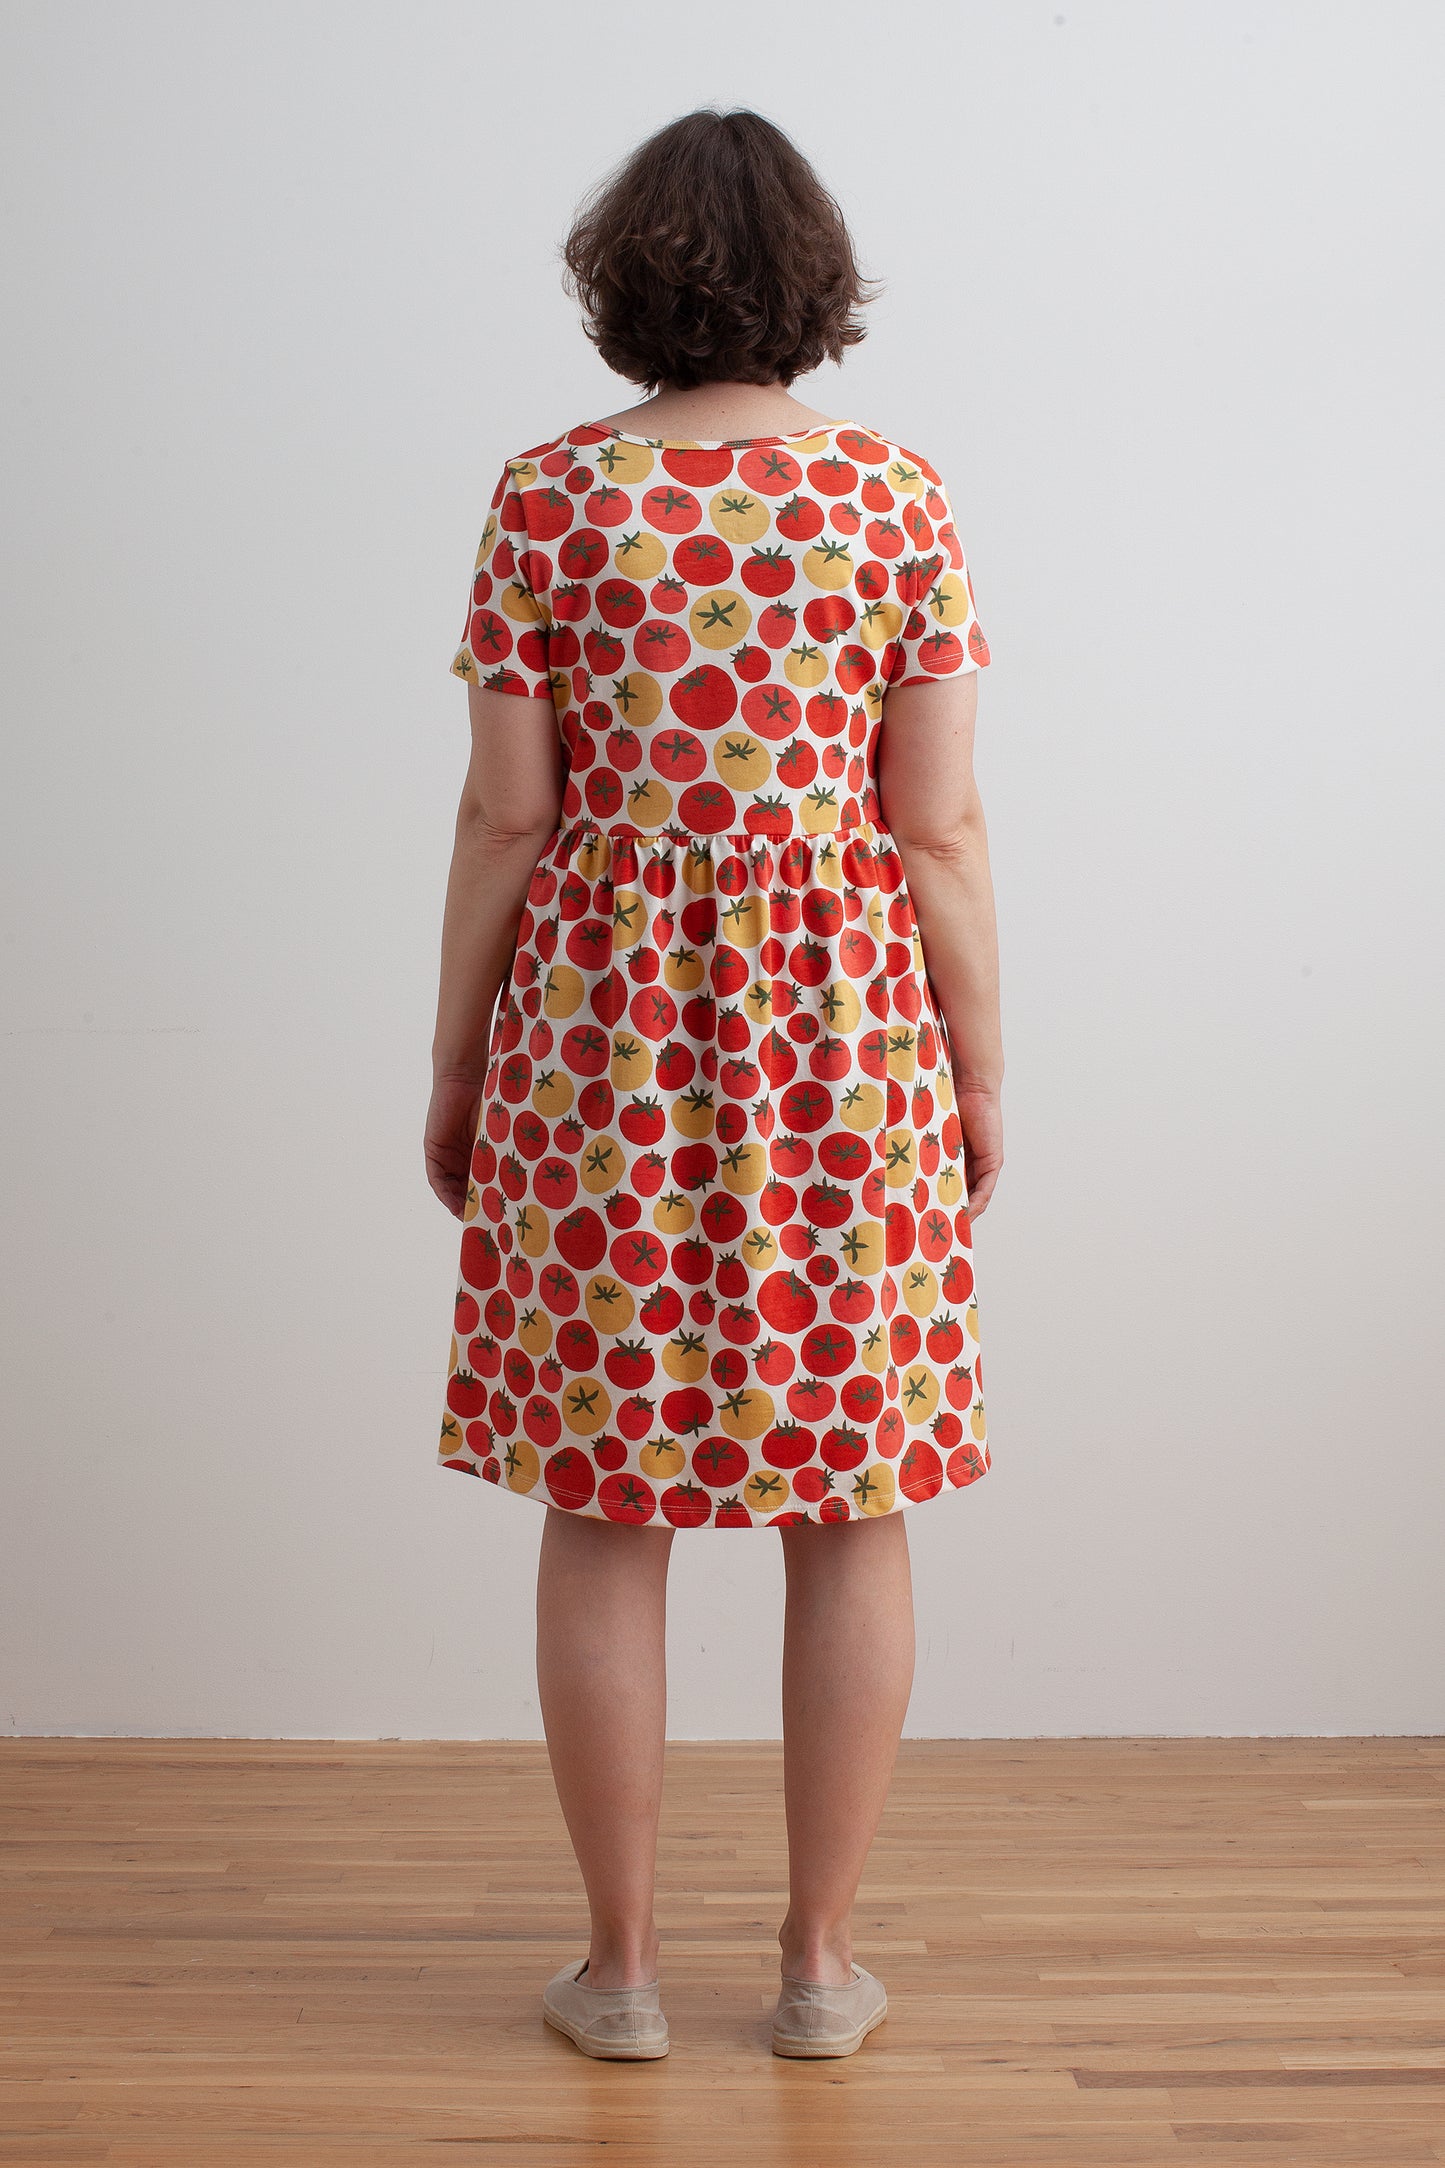 Women's Stockholm Dress - Tomatoes Red & Yellow